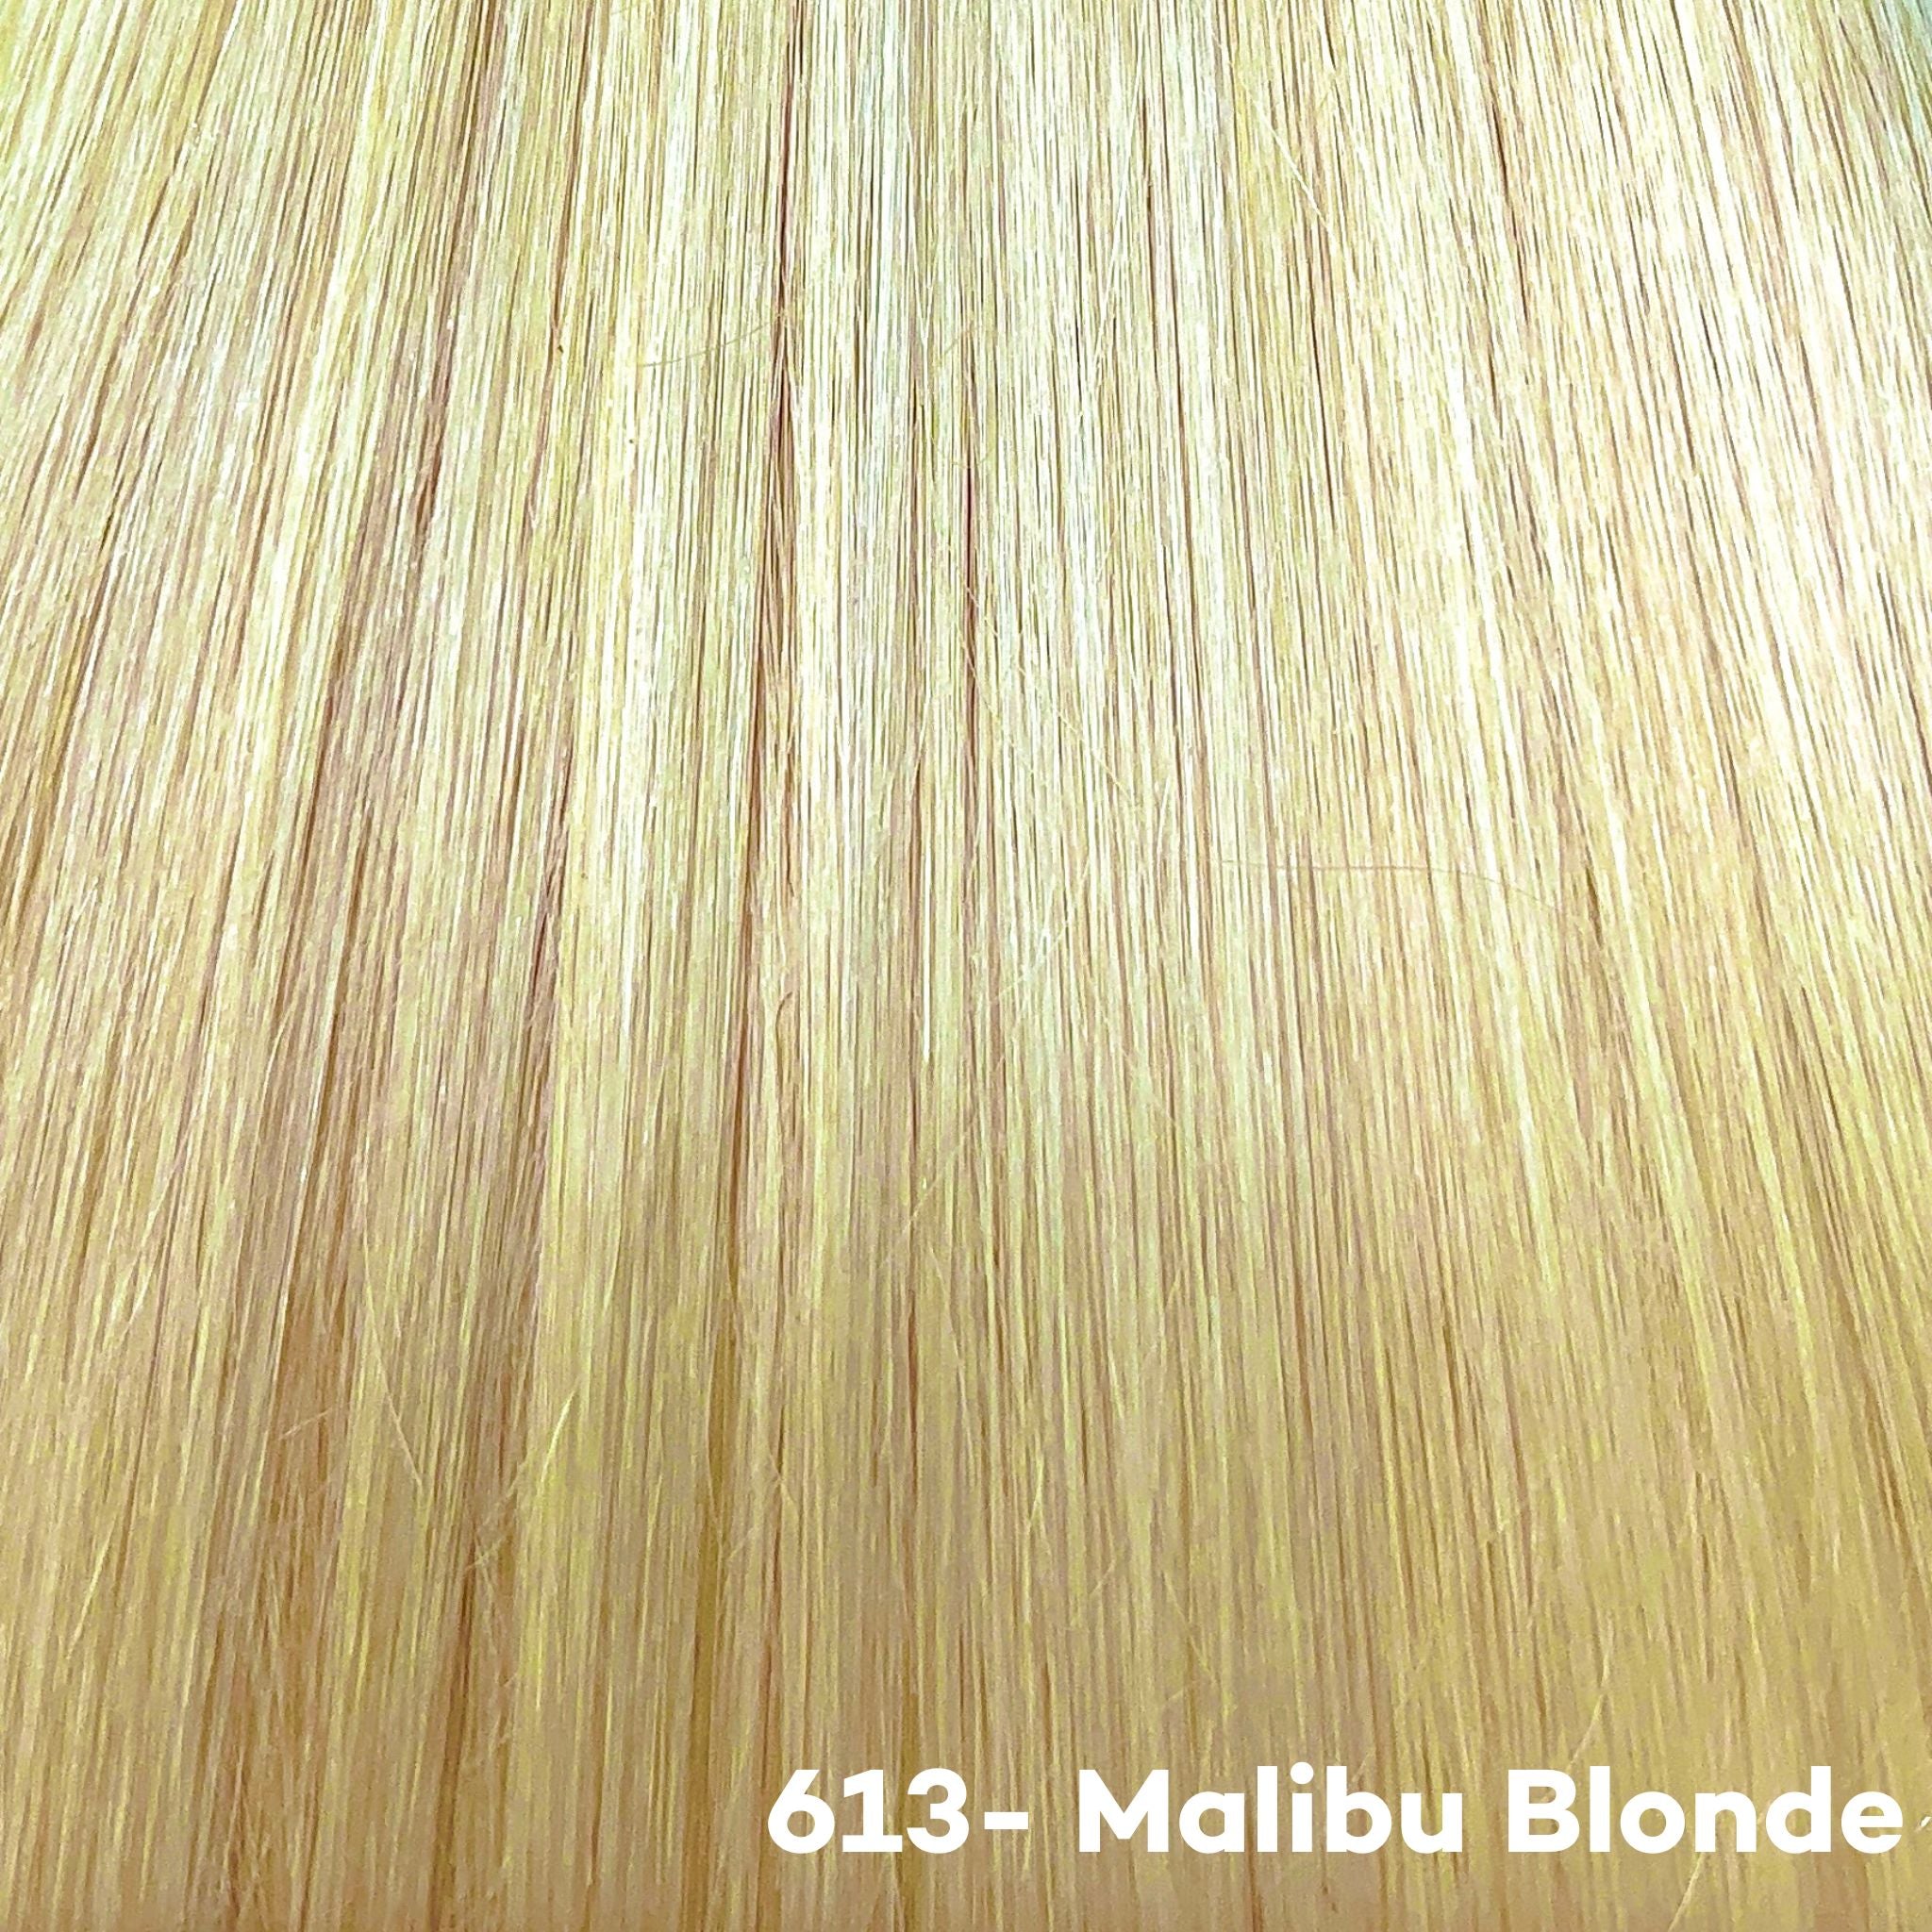 Yellow Blonde Hair Extensions - Color 613 | Bellami Hair Extensions. Discover the perfect yellow blonde shade in our premium hair extensions collection. Find hair extensions near me at Bellami for high-quality and beautifully colored hair extensions